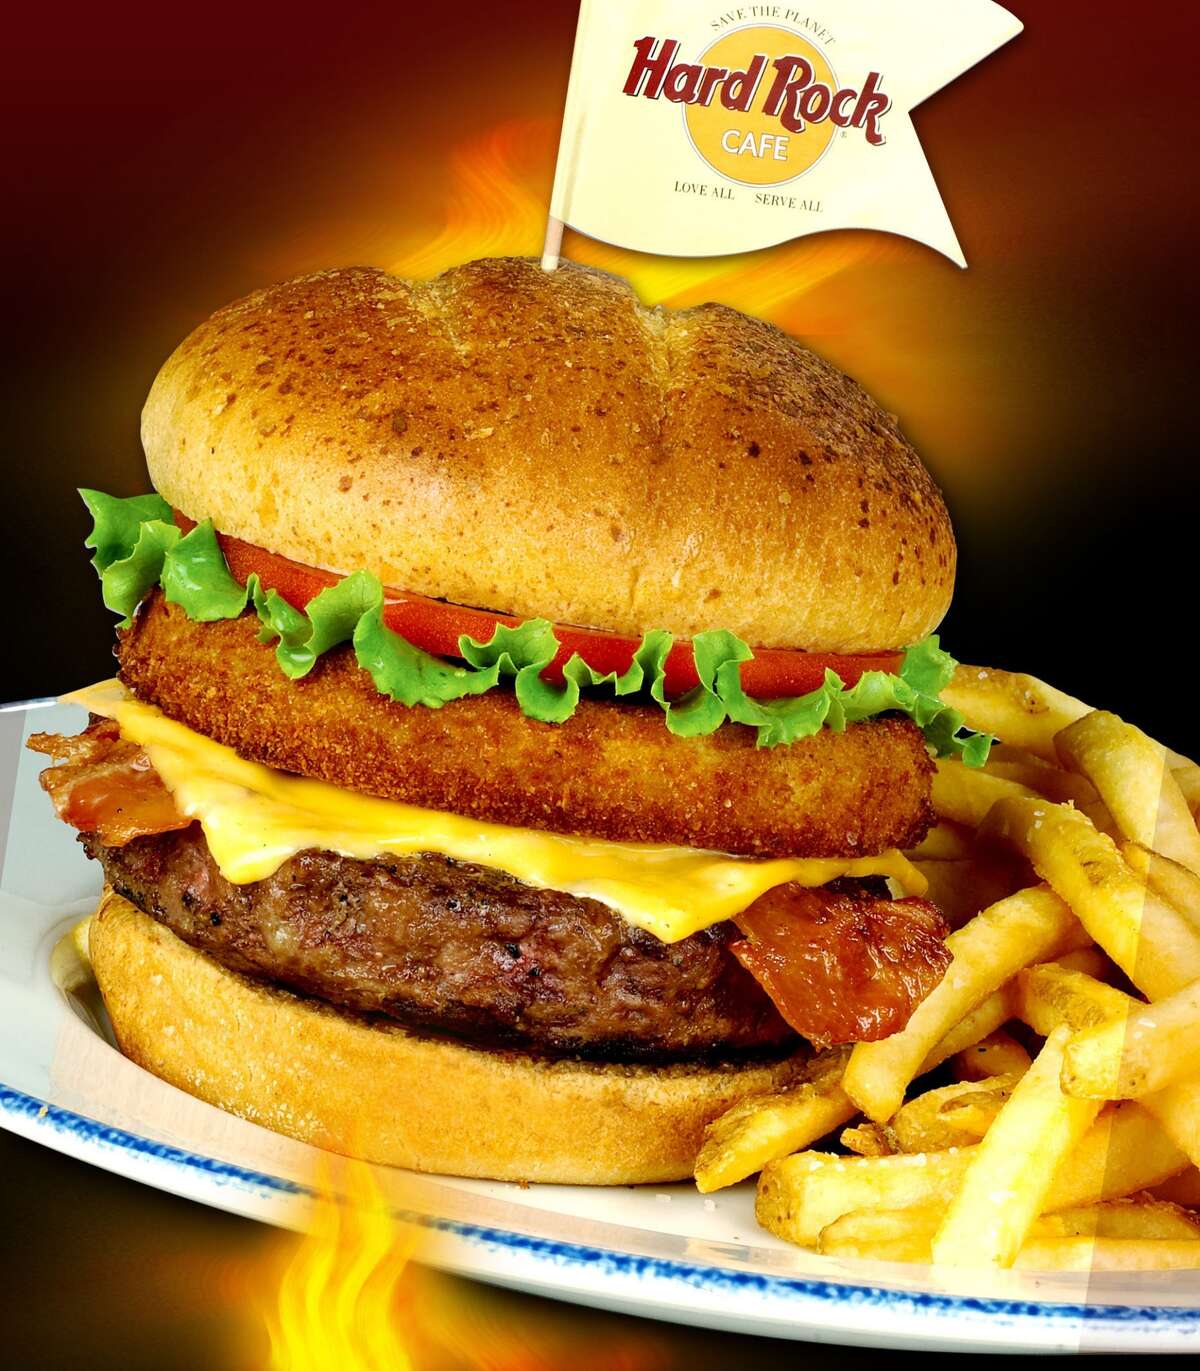 A burger from Hard Rock Cafe.